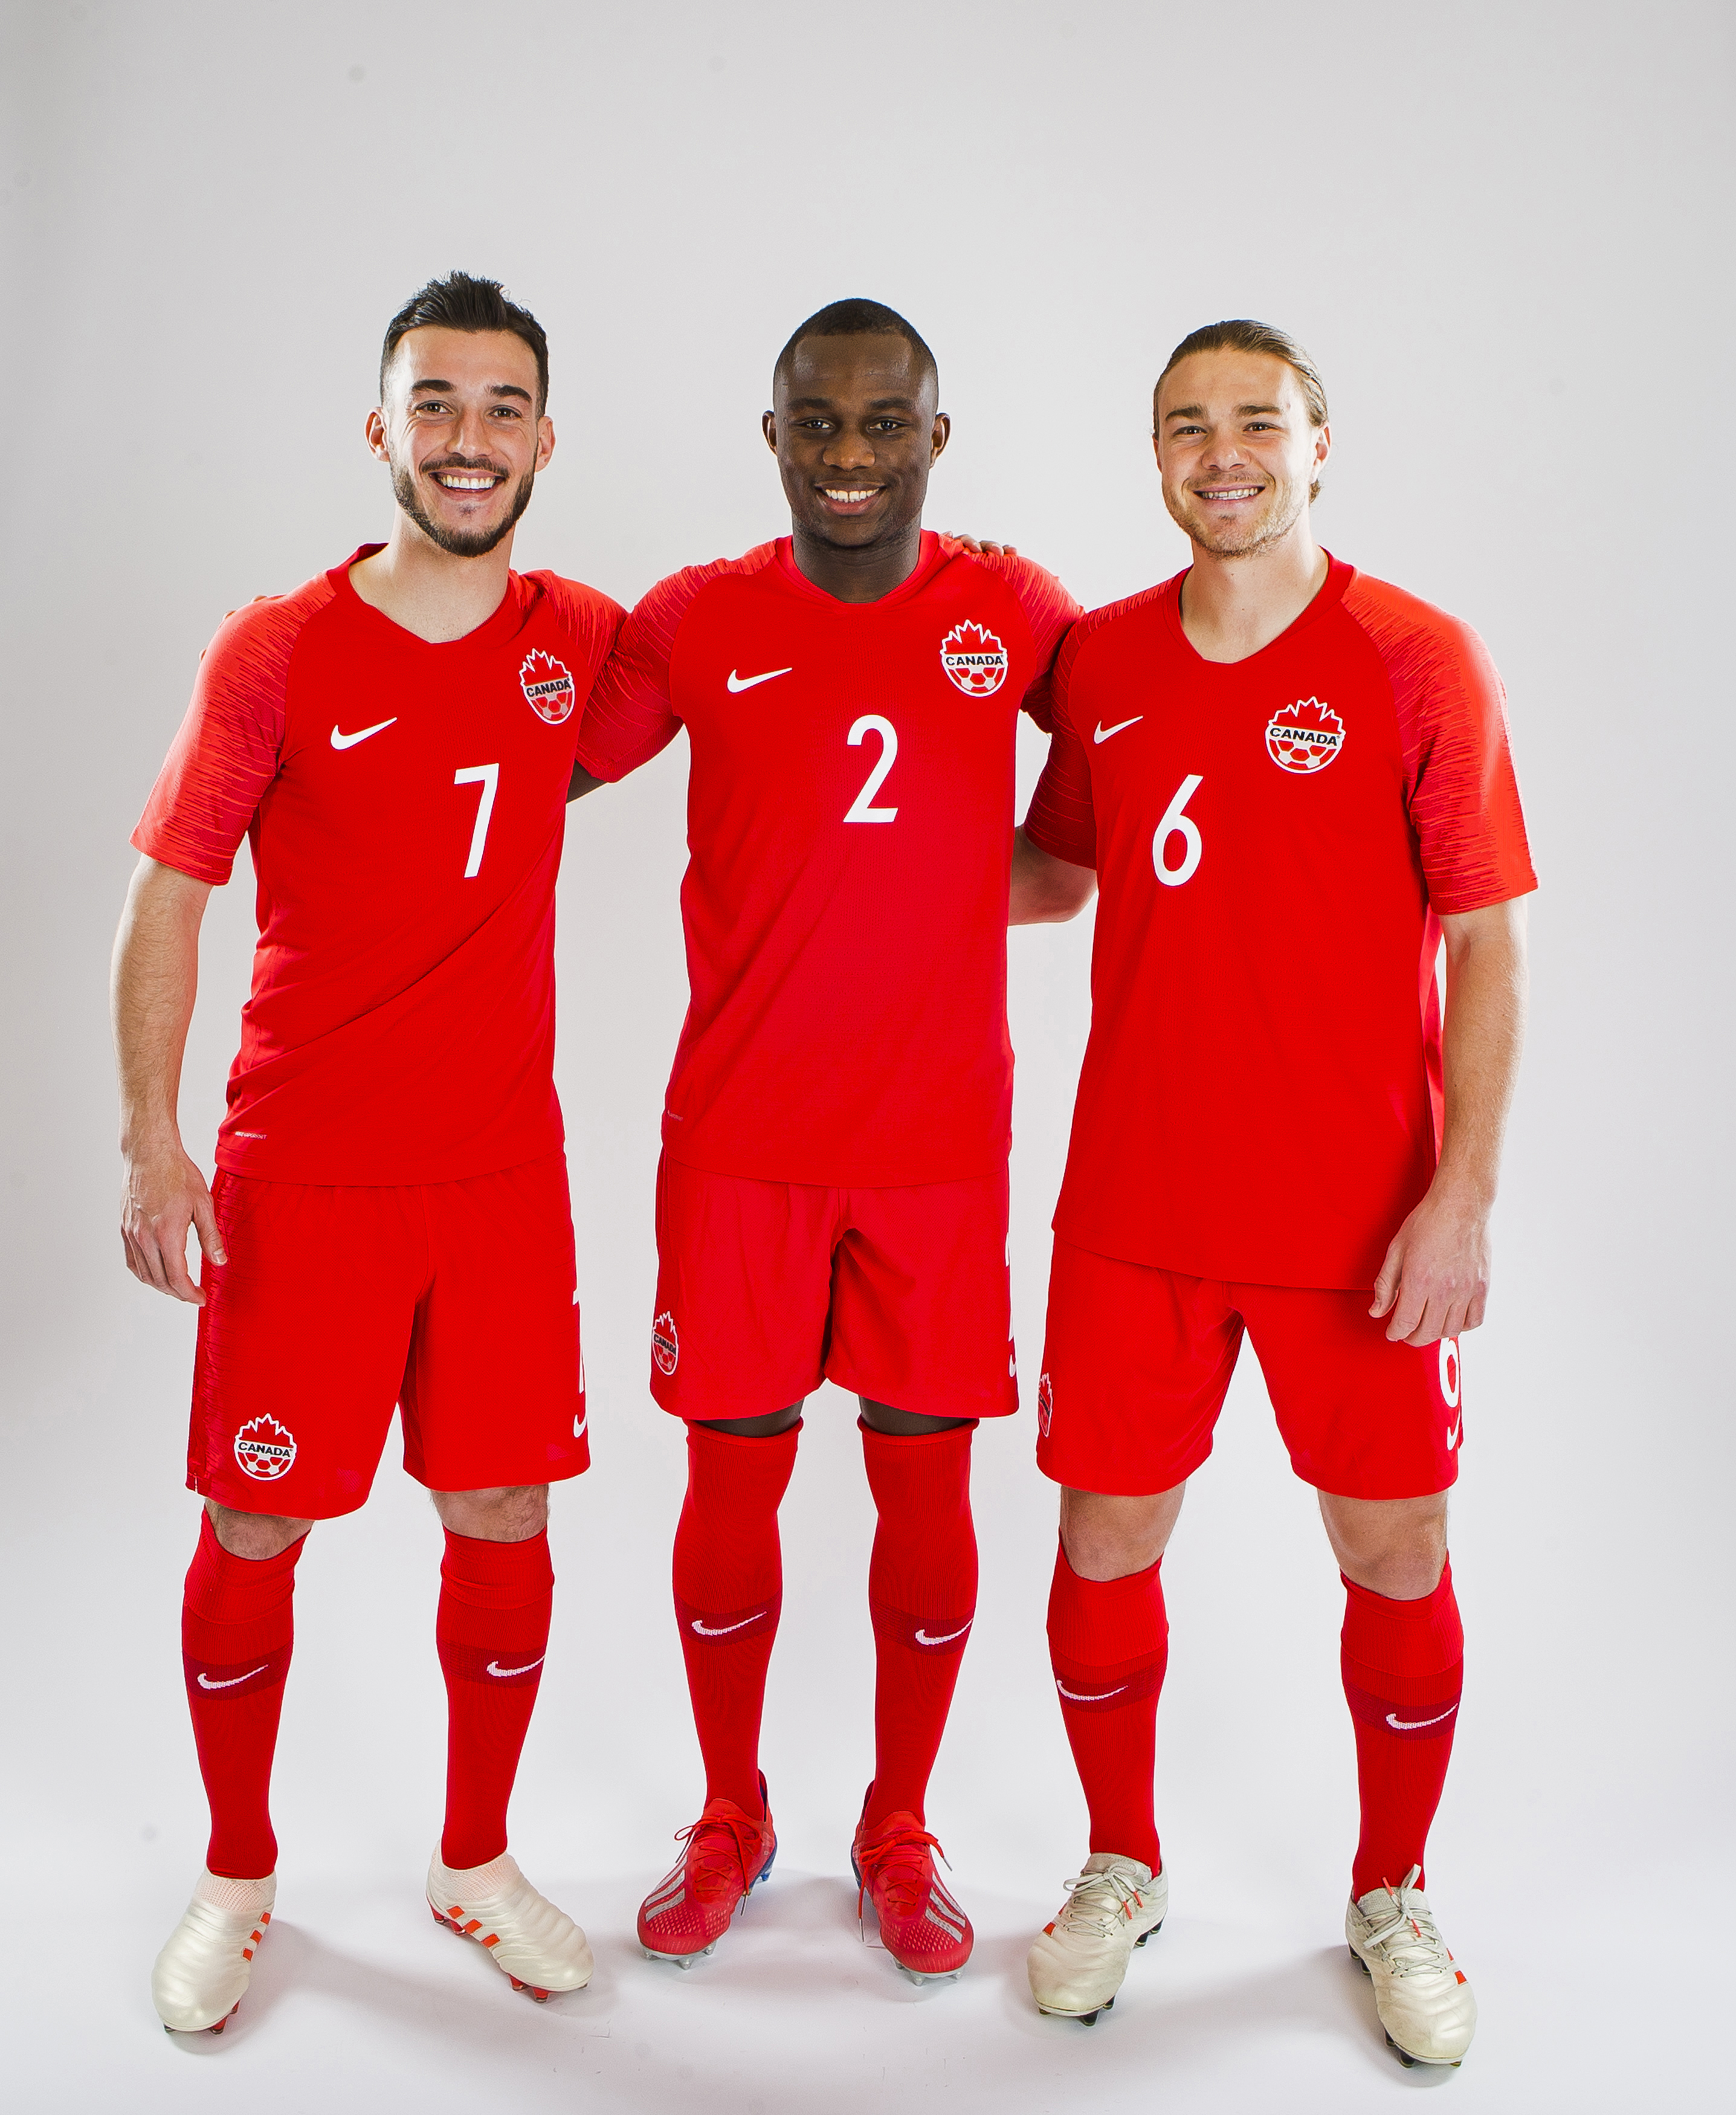 20190318_CANMNT_byFrid06